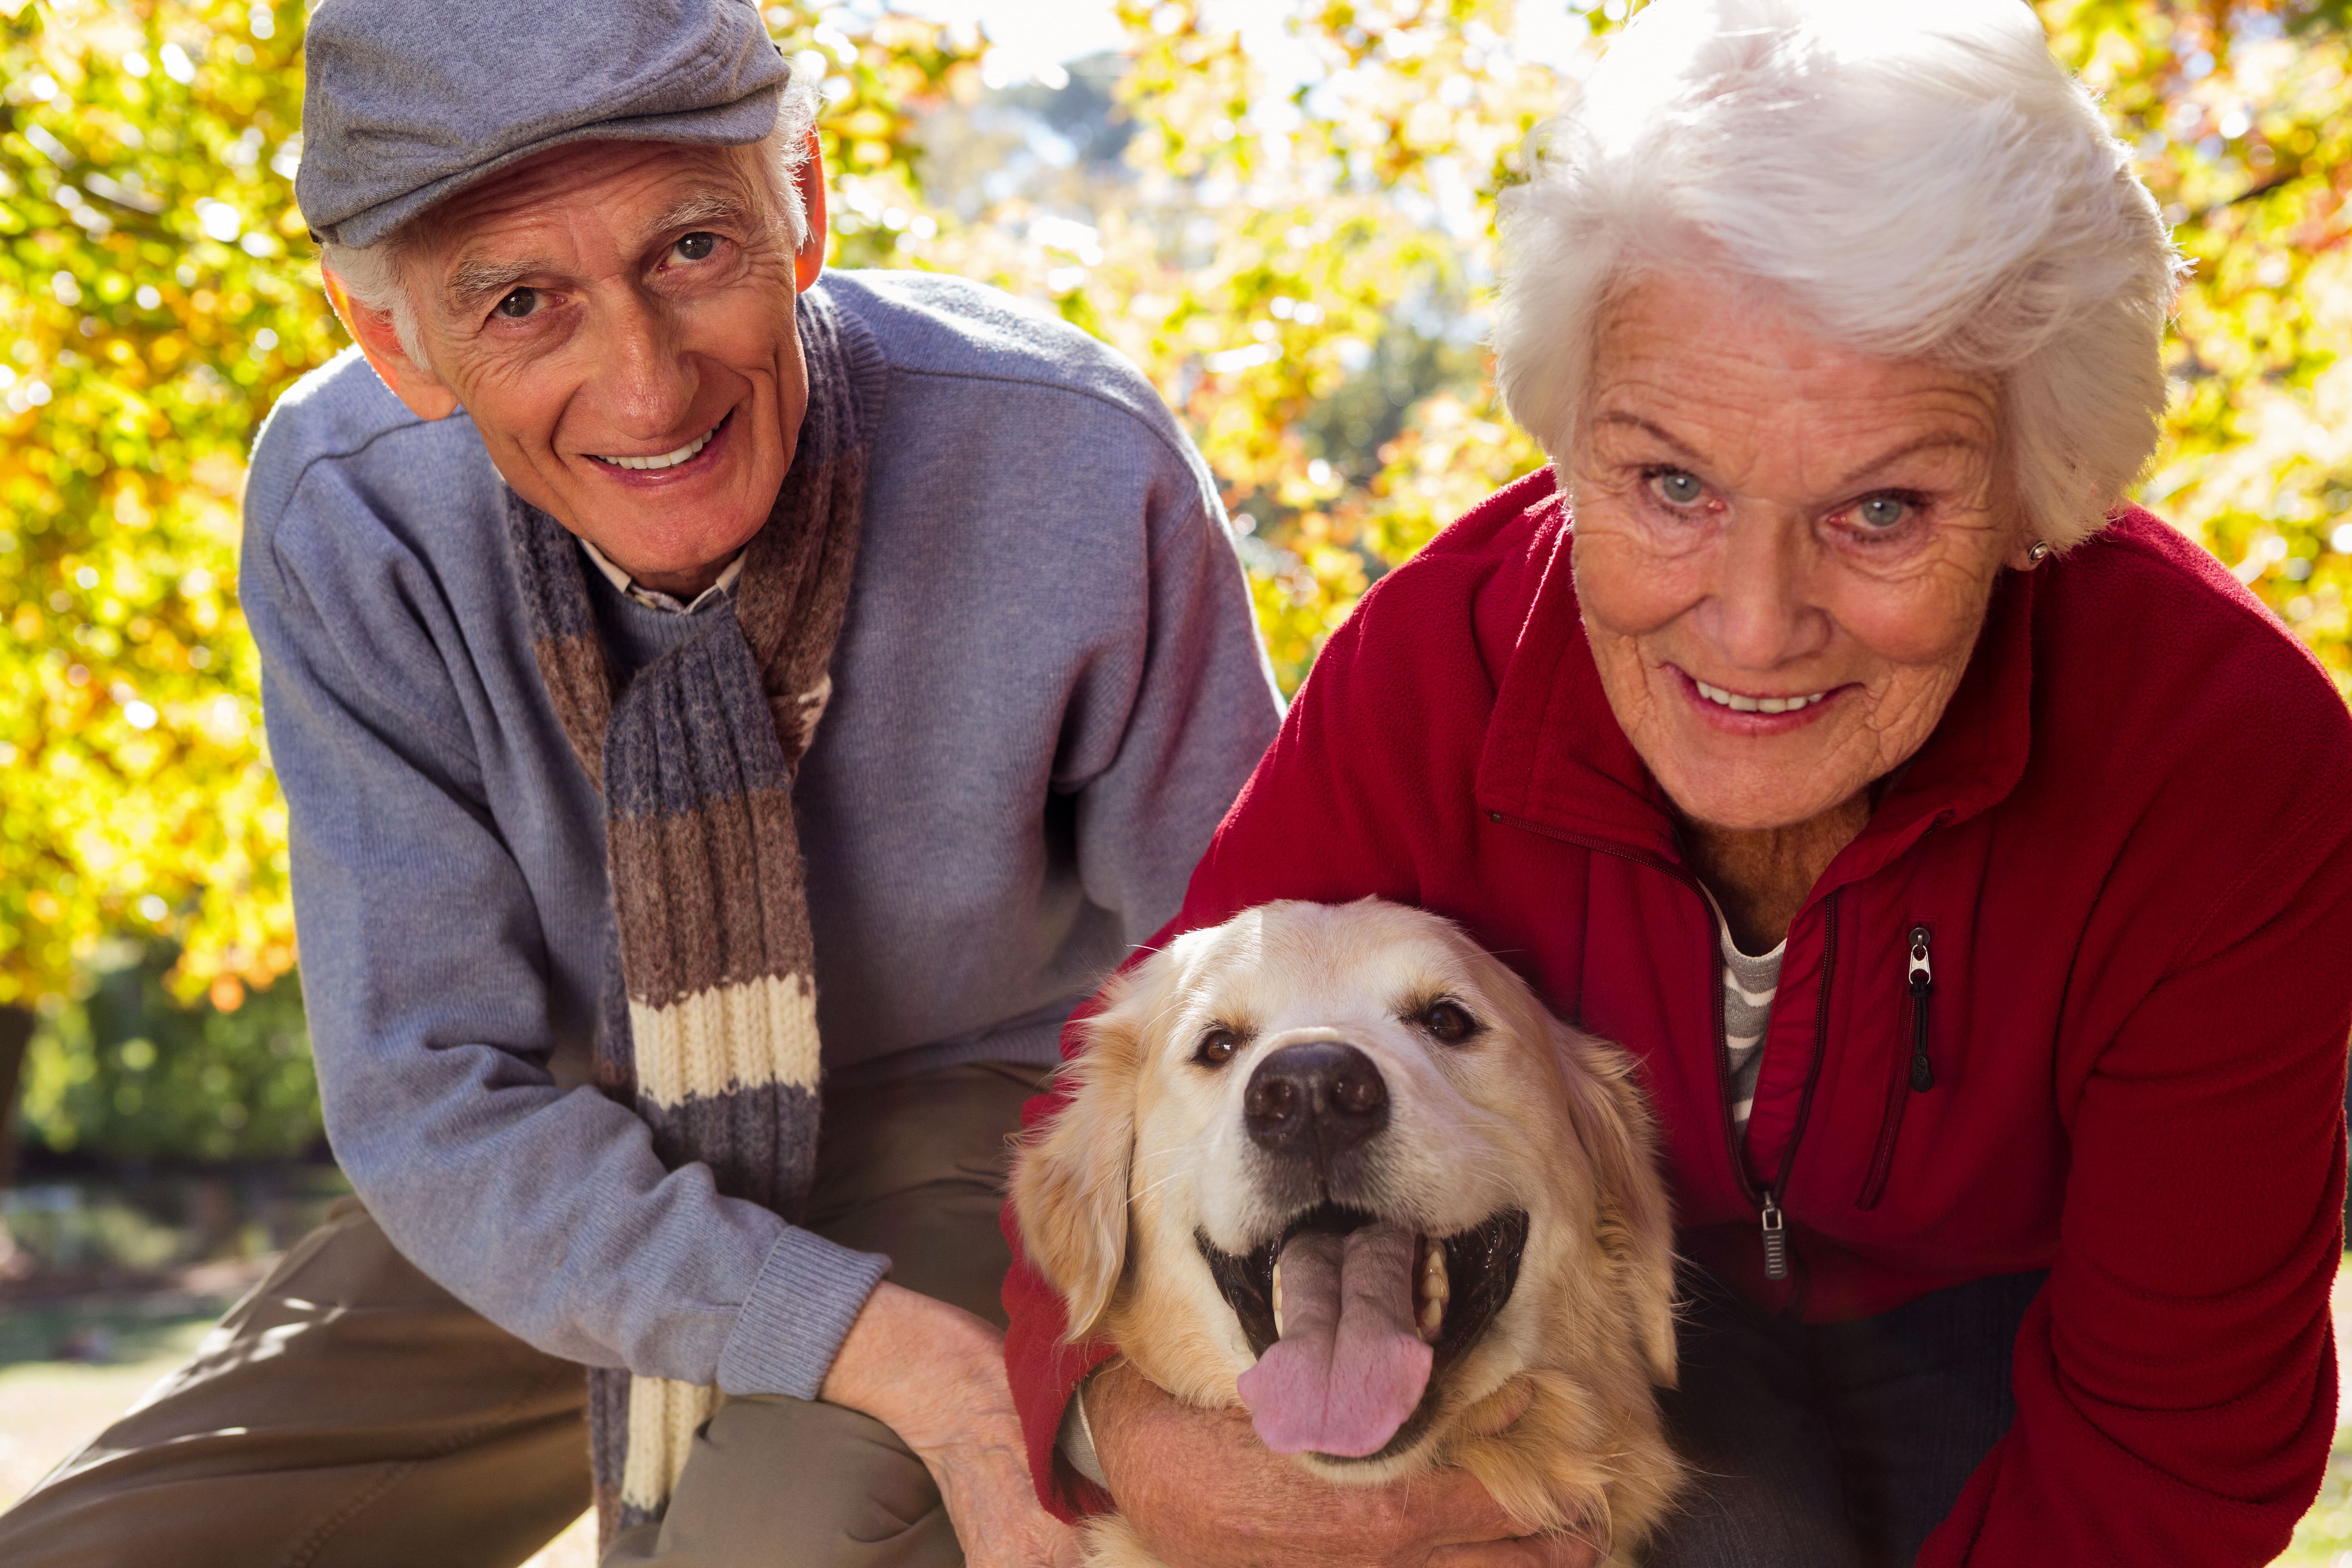 Two seniors with dog outside in autumn